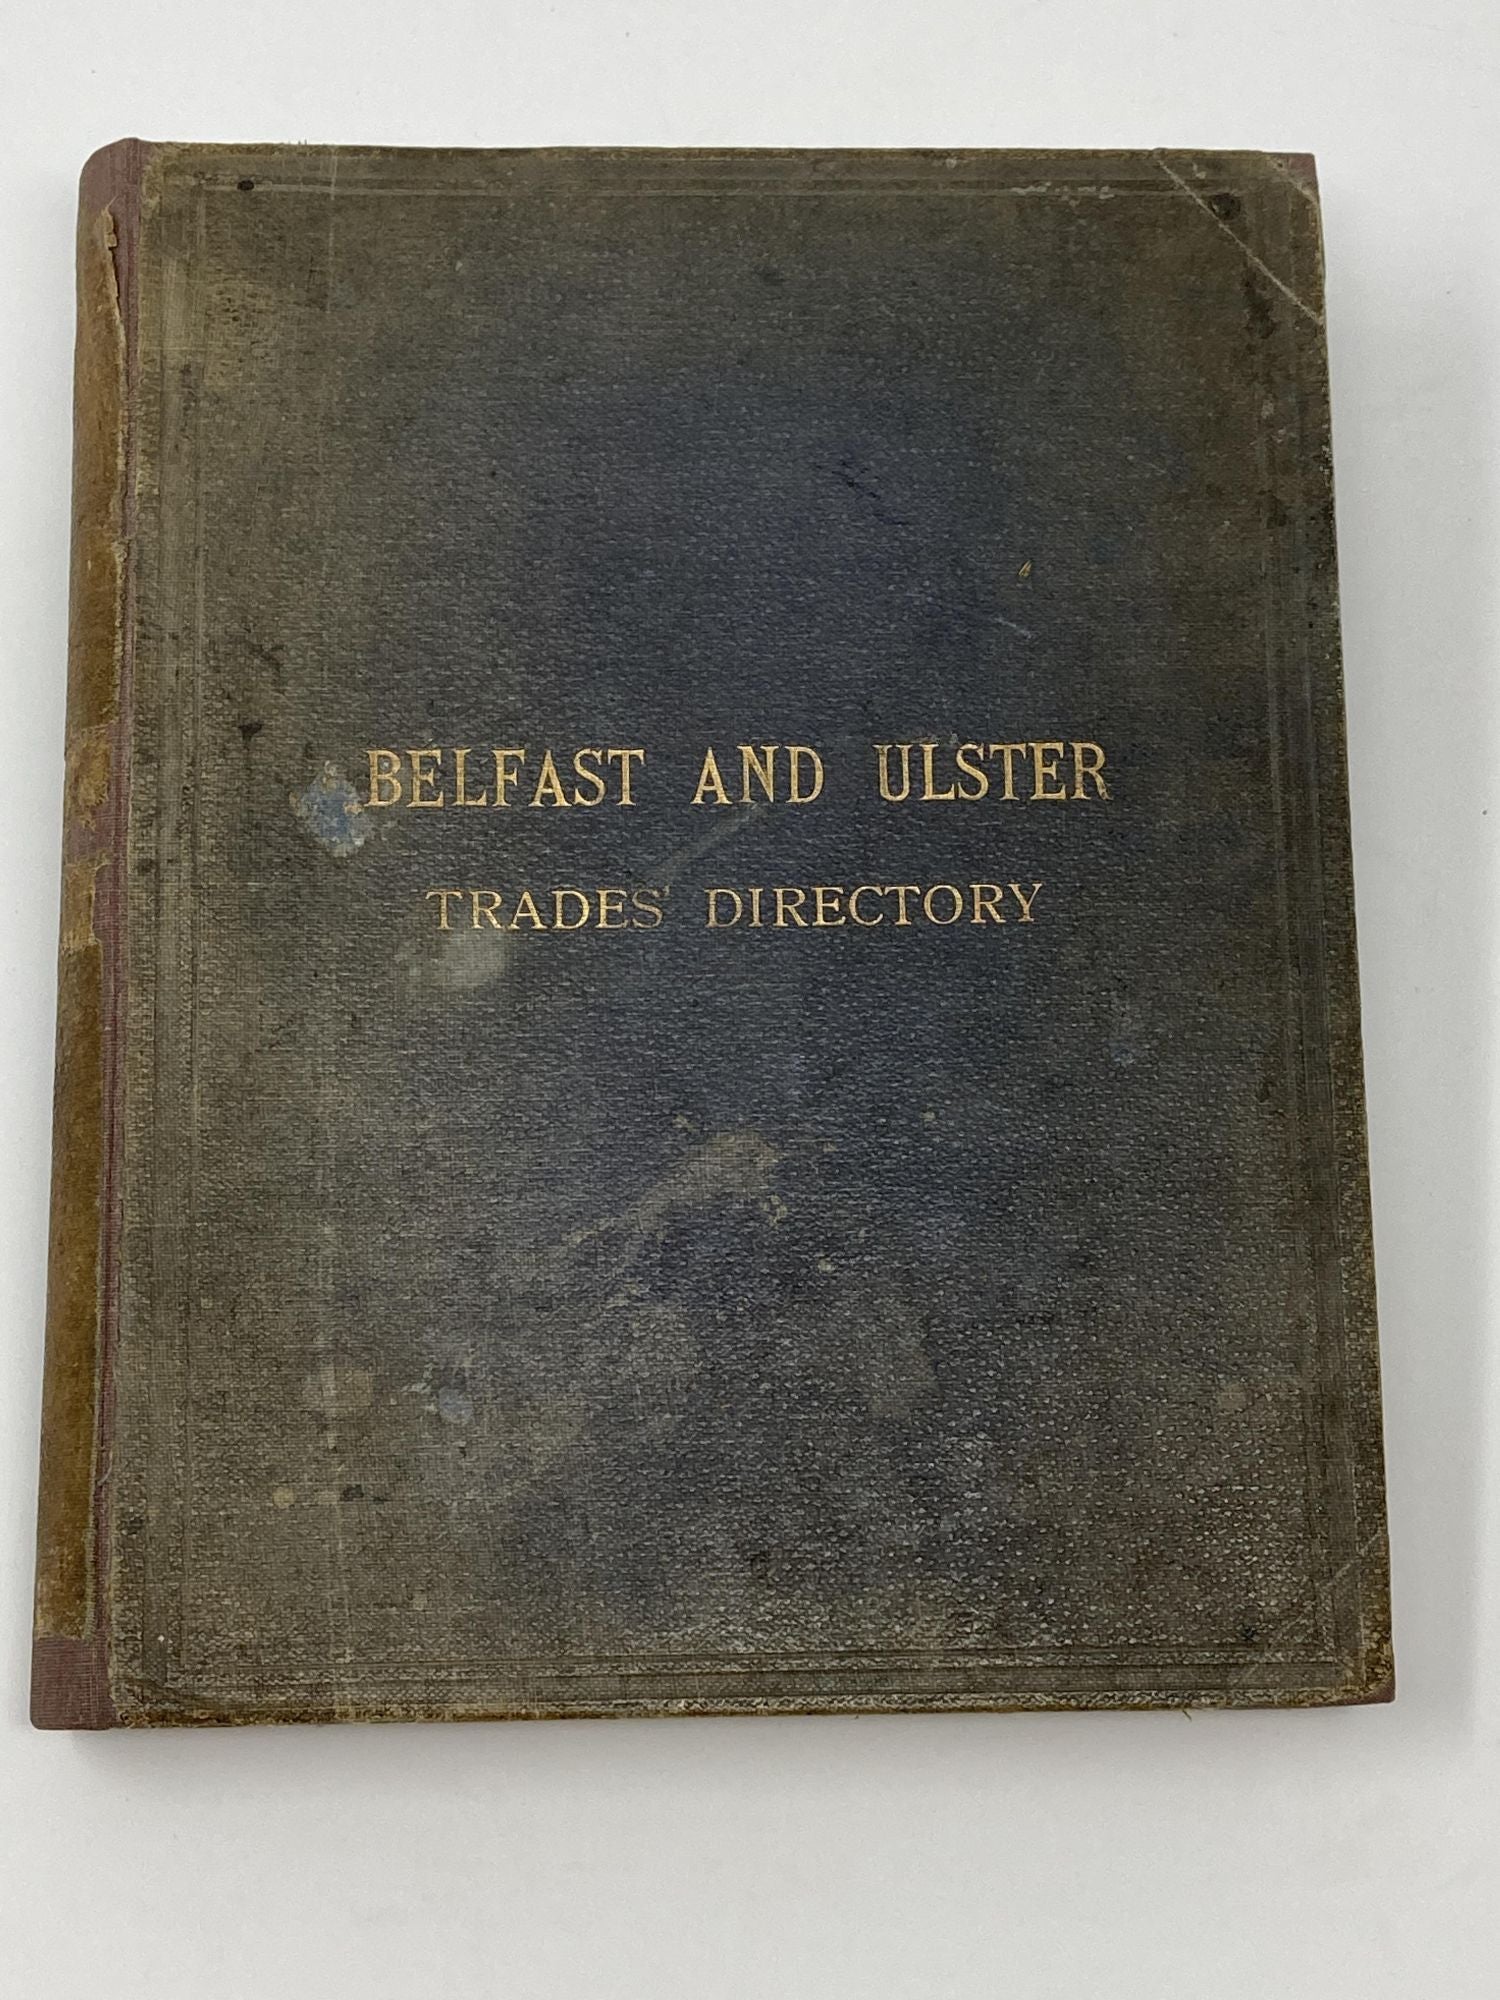 Trades' Directories, Limited - The Belfast and Ulster Trades Directory Accompanied with a Gazetteer of Ireland, 1900